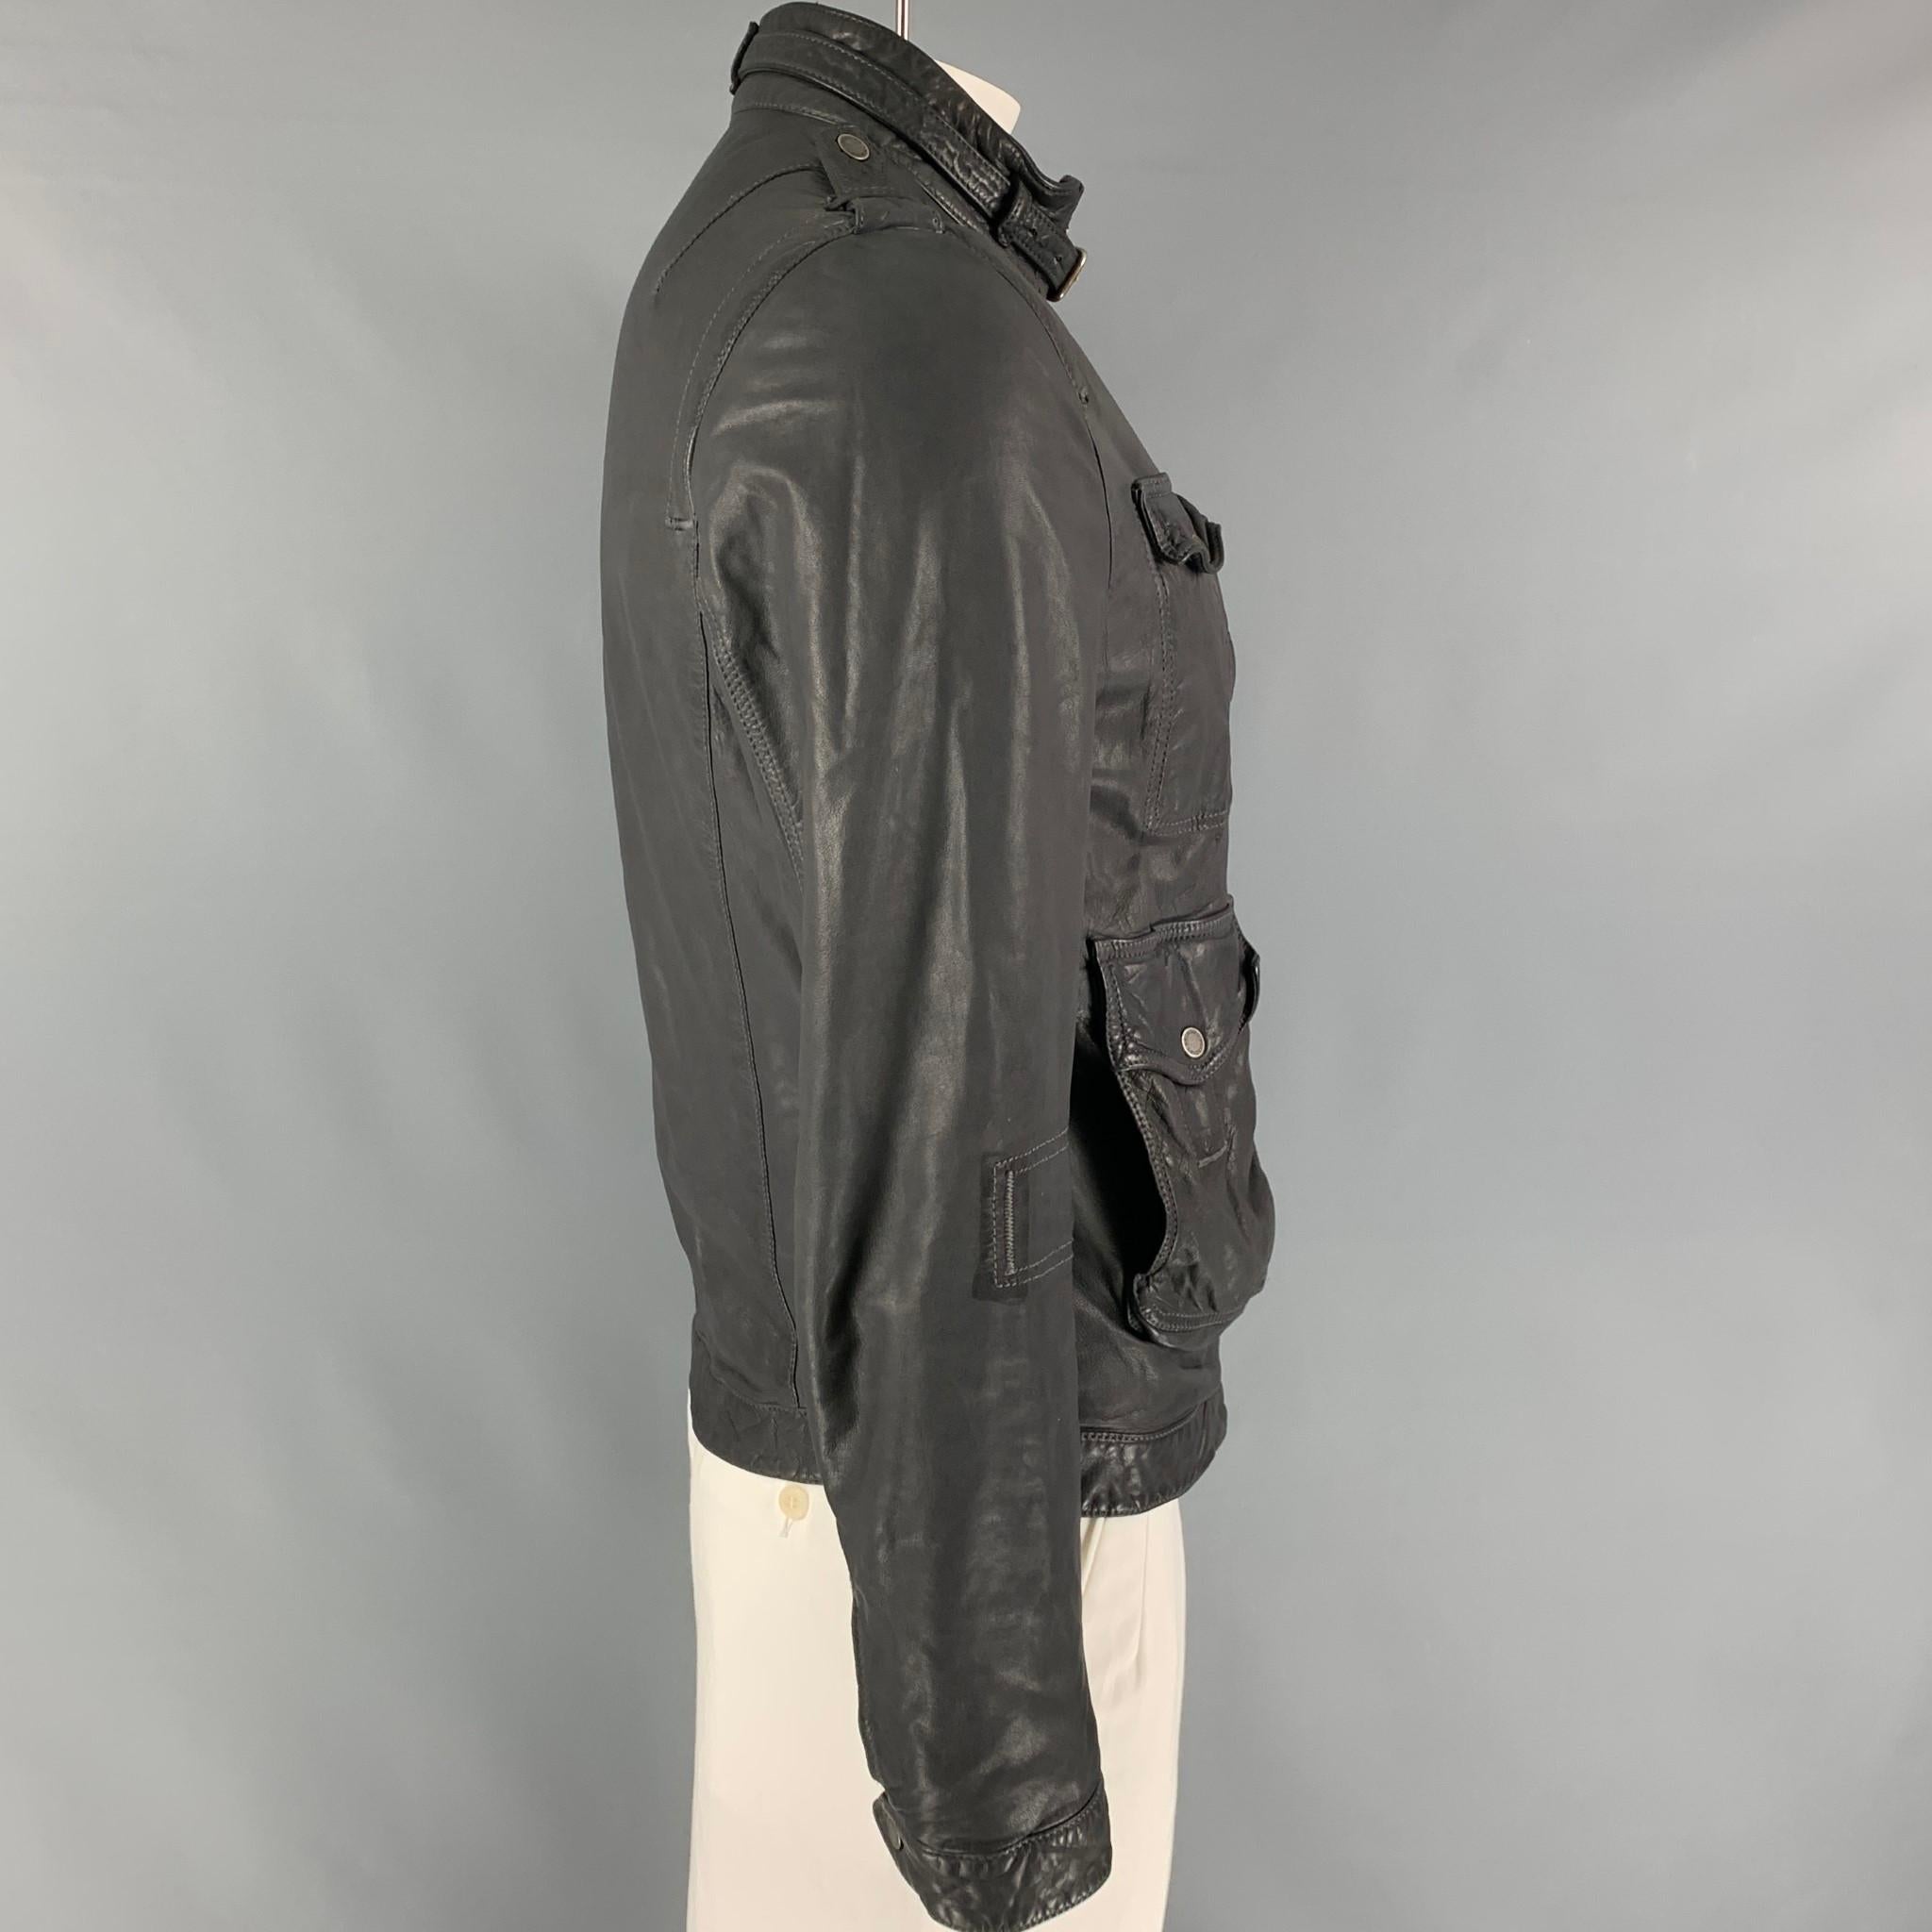 NEIL BARRETT jacket comes in a smoke gray distressed leather featuring a utility style, front pockets, epaulettes strap buckle collar detail, and a full zip up closure. Made in Italy. 

Very Good Pre-Owned Condition.
Marked: